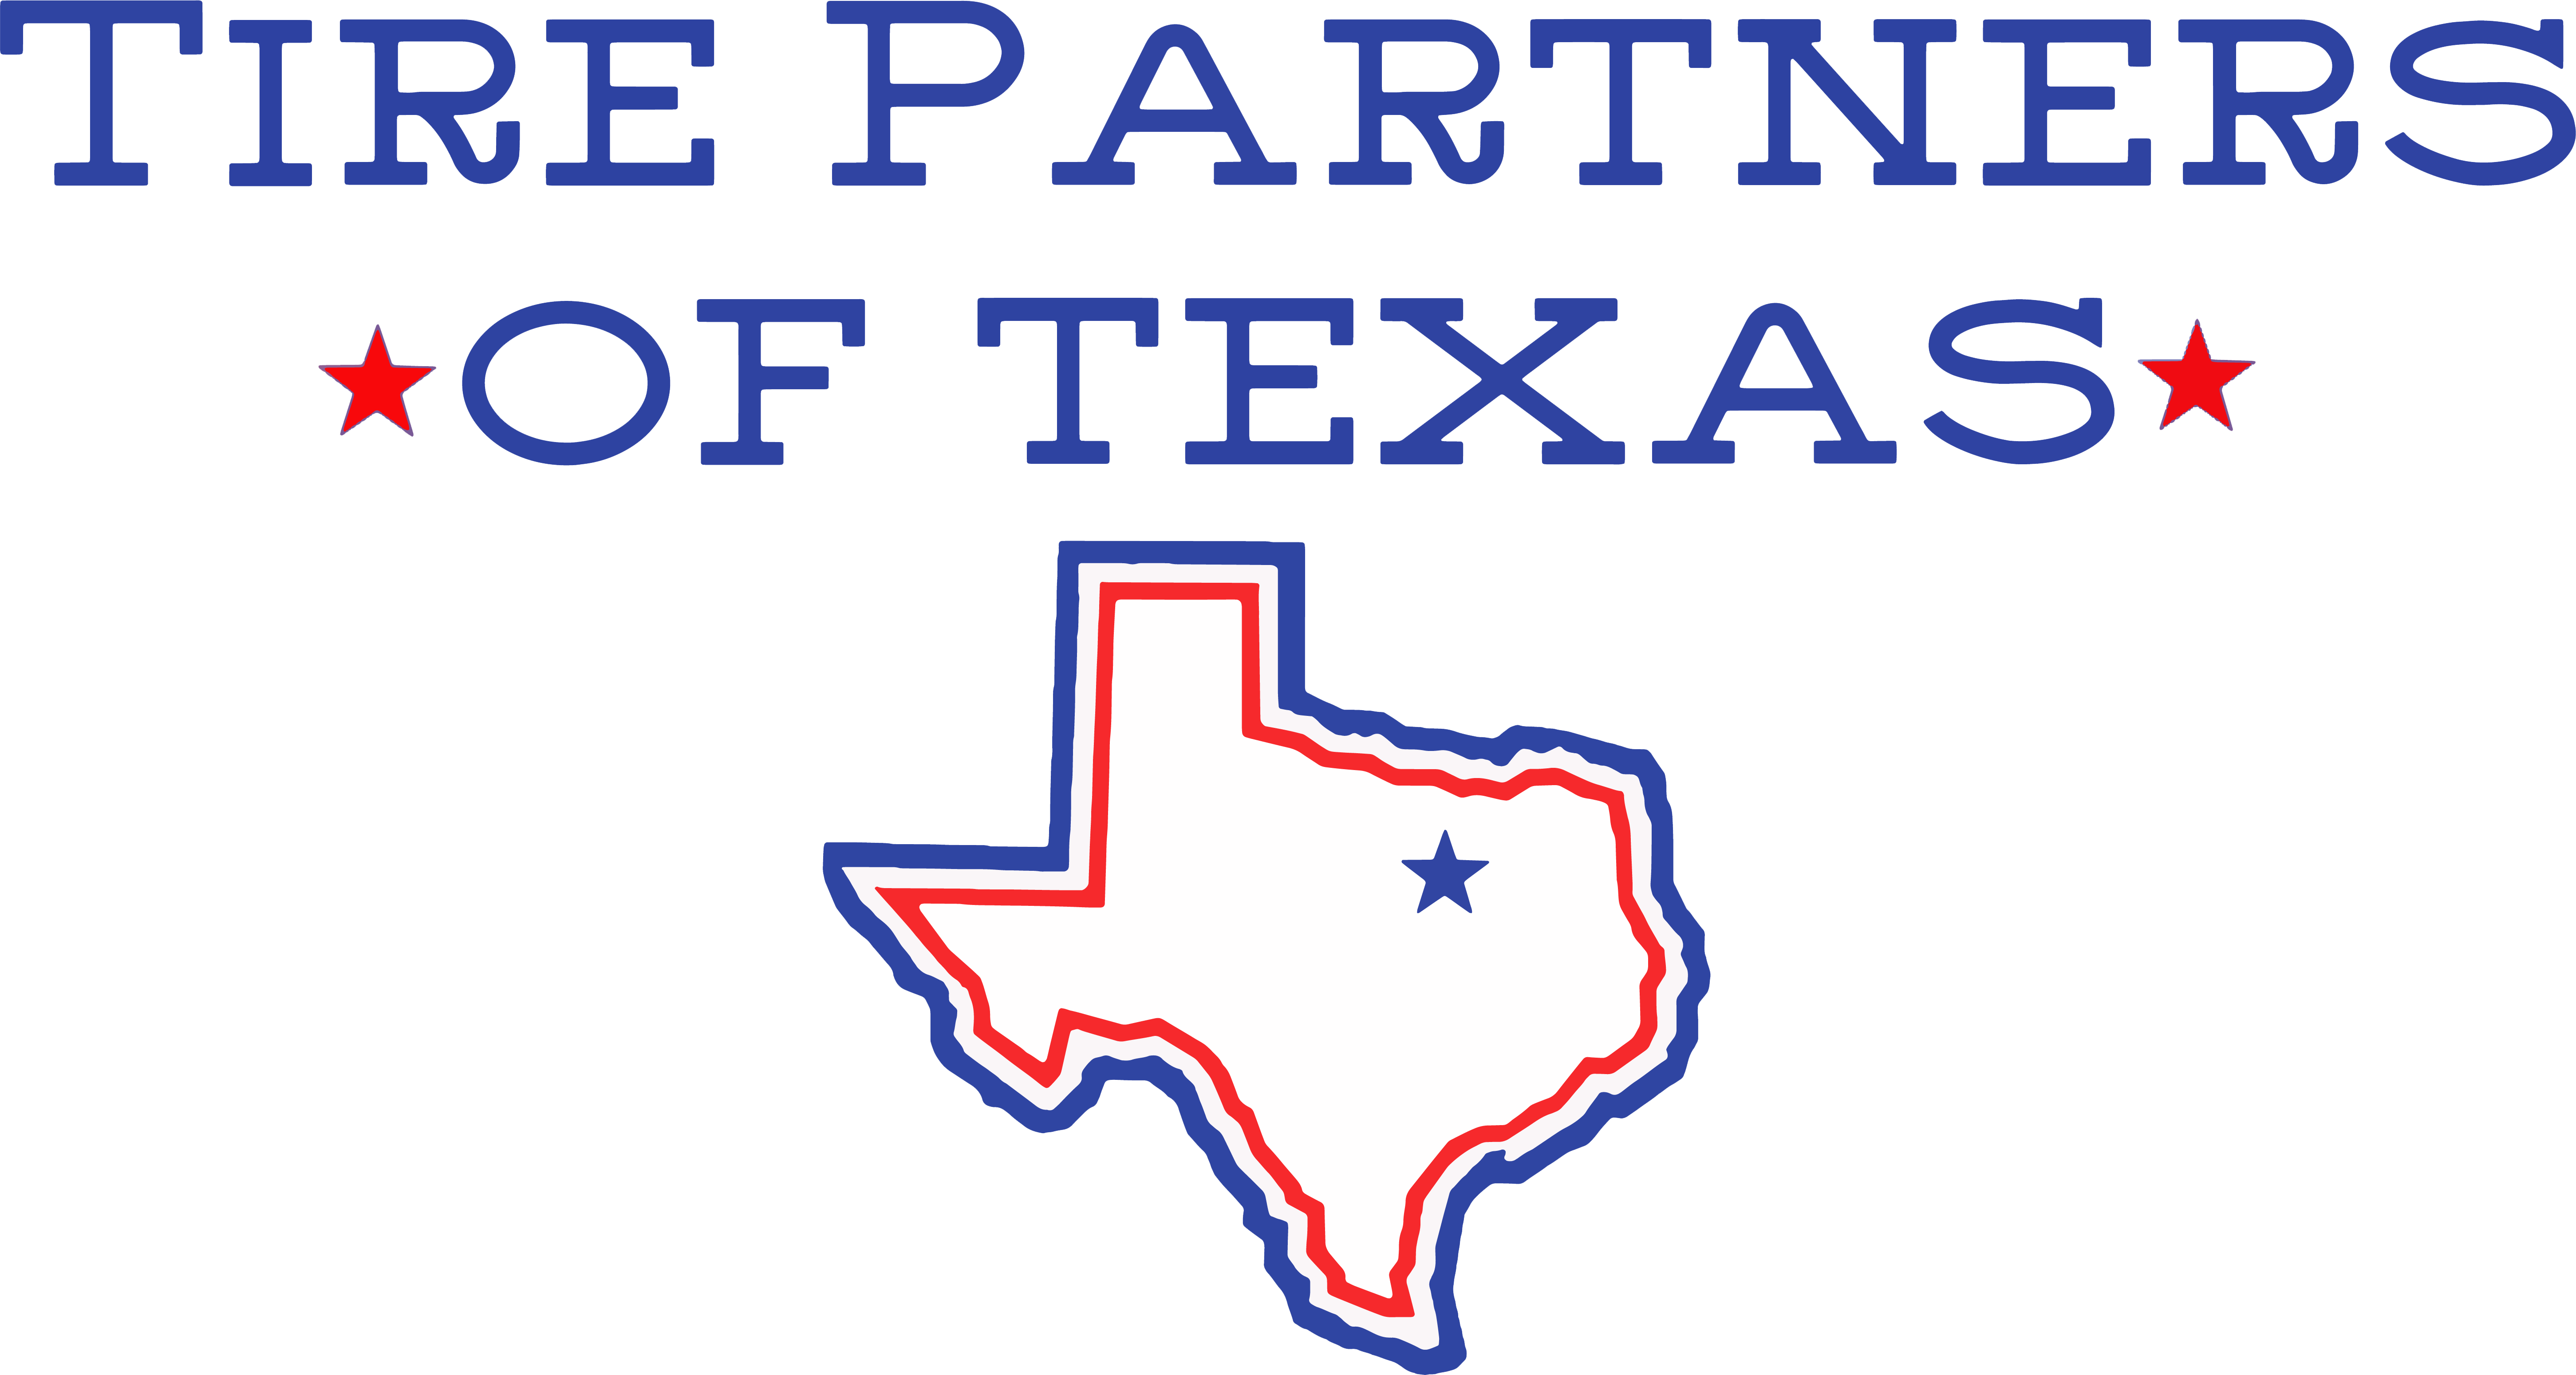 Welcome to Tire Partners of Texas